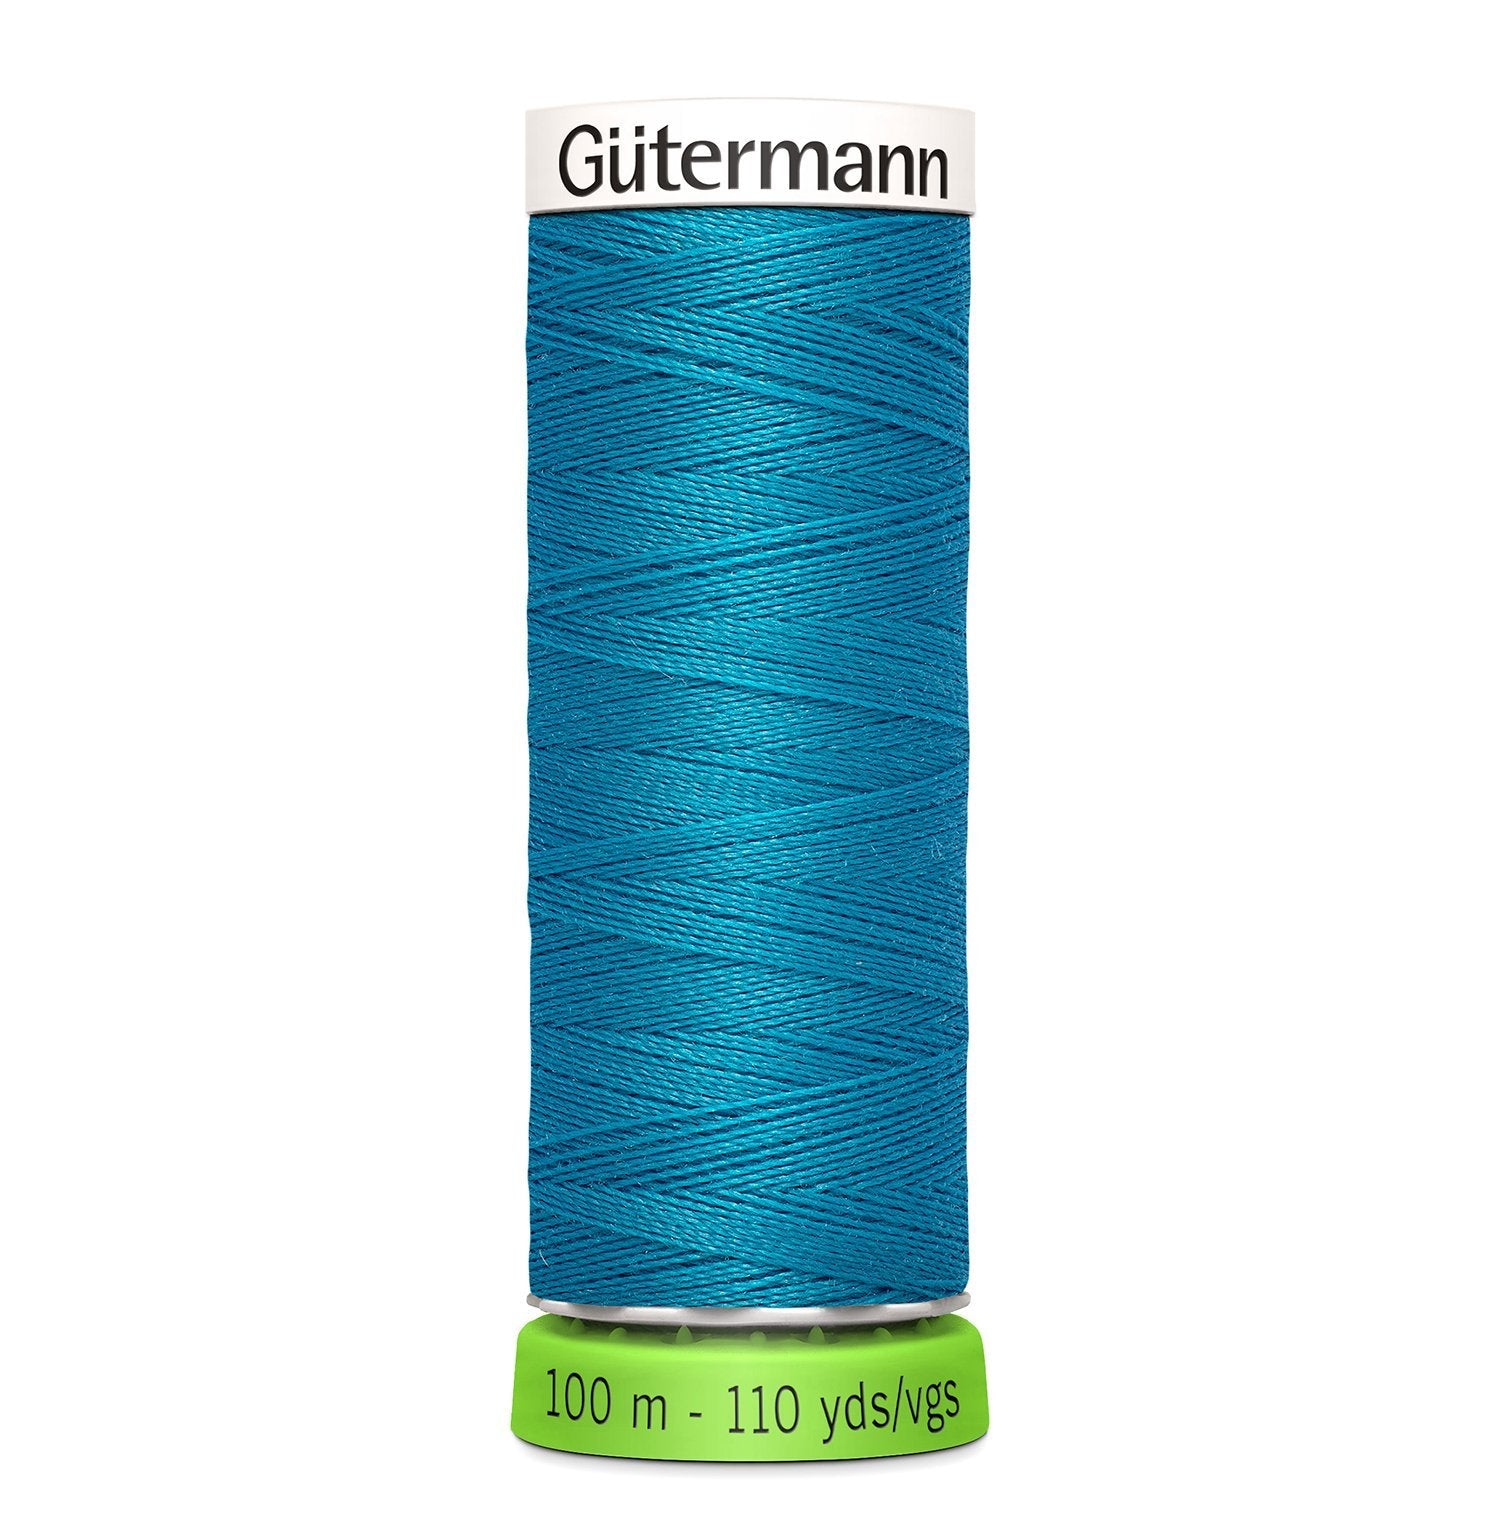 Gutermann Recycled Thread 100m, Colour 761 from Jaycotts Sewing Supplies